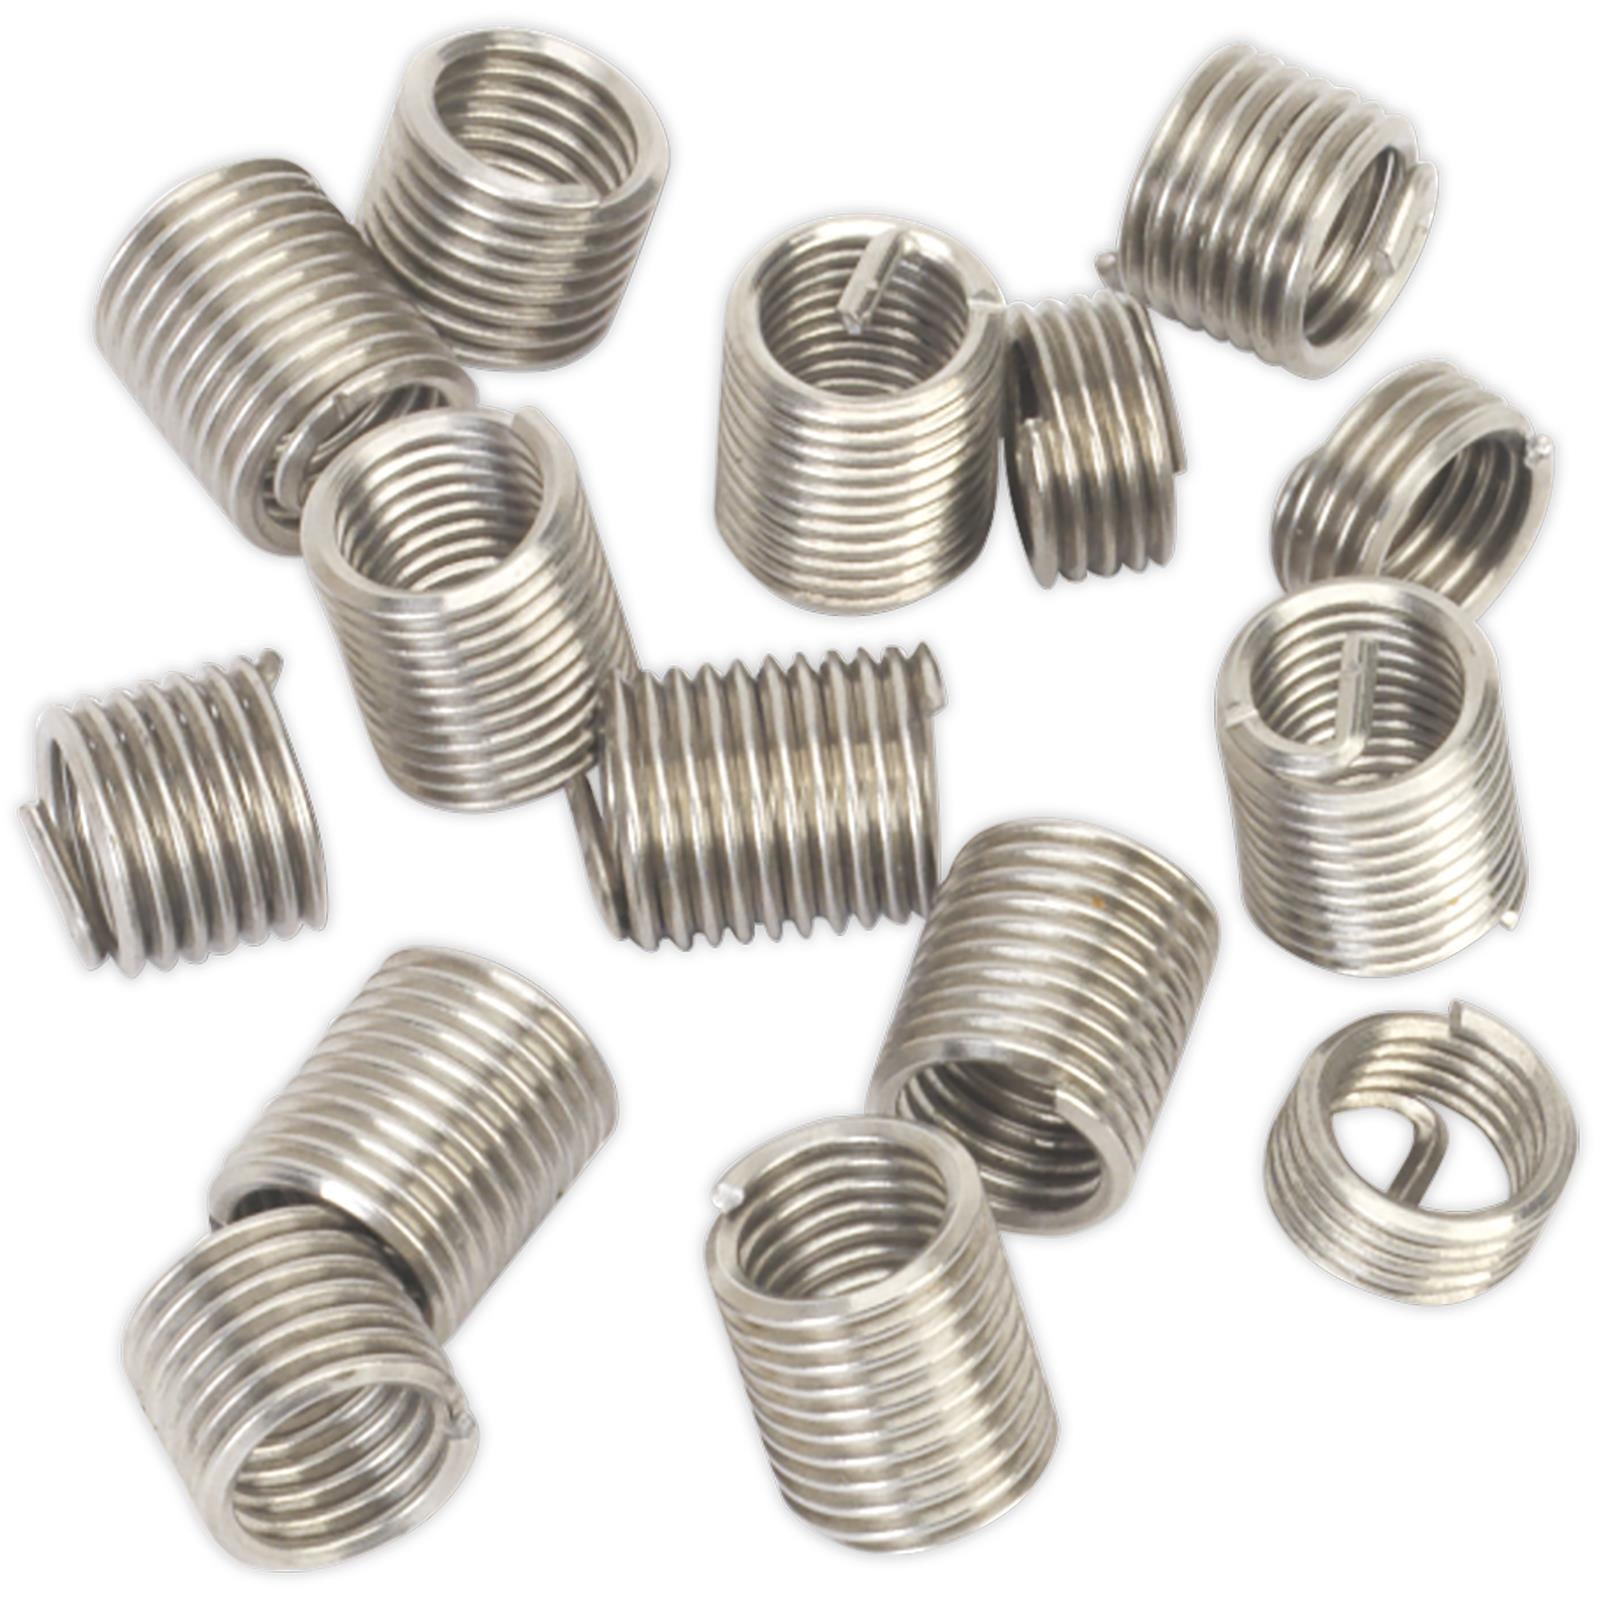 Sealey Thread Insert M14 x 1.25mm for TRM14 Threaded Inserts Helicoil 5 Pack